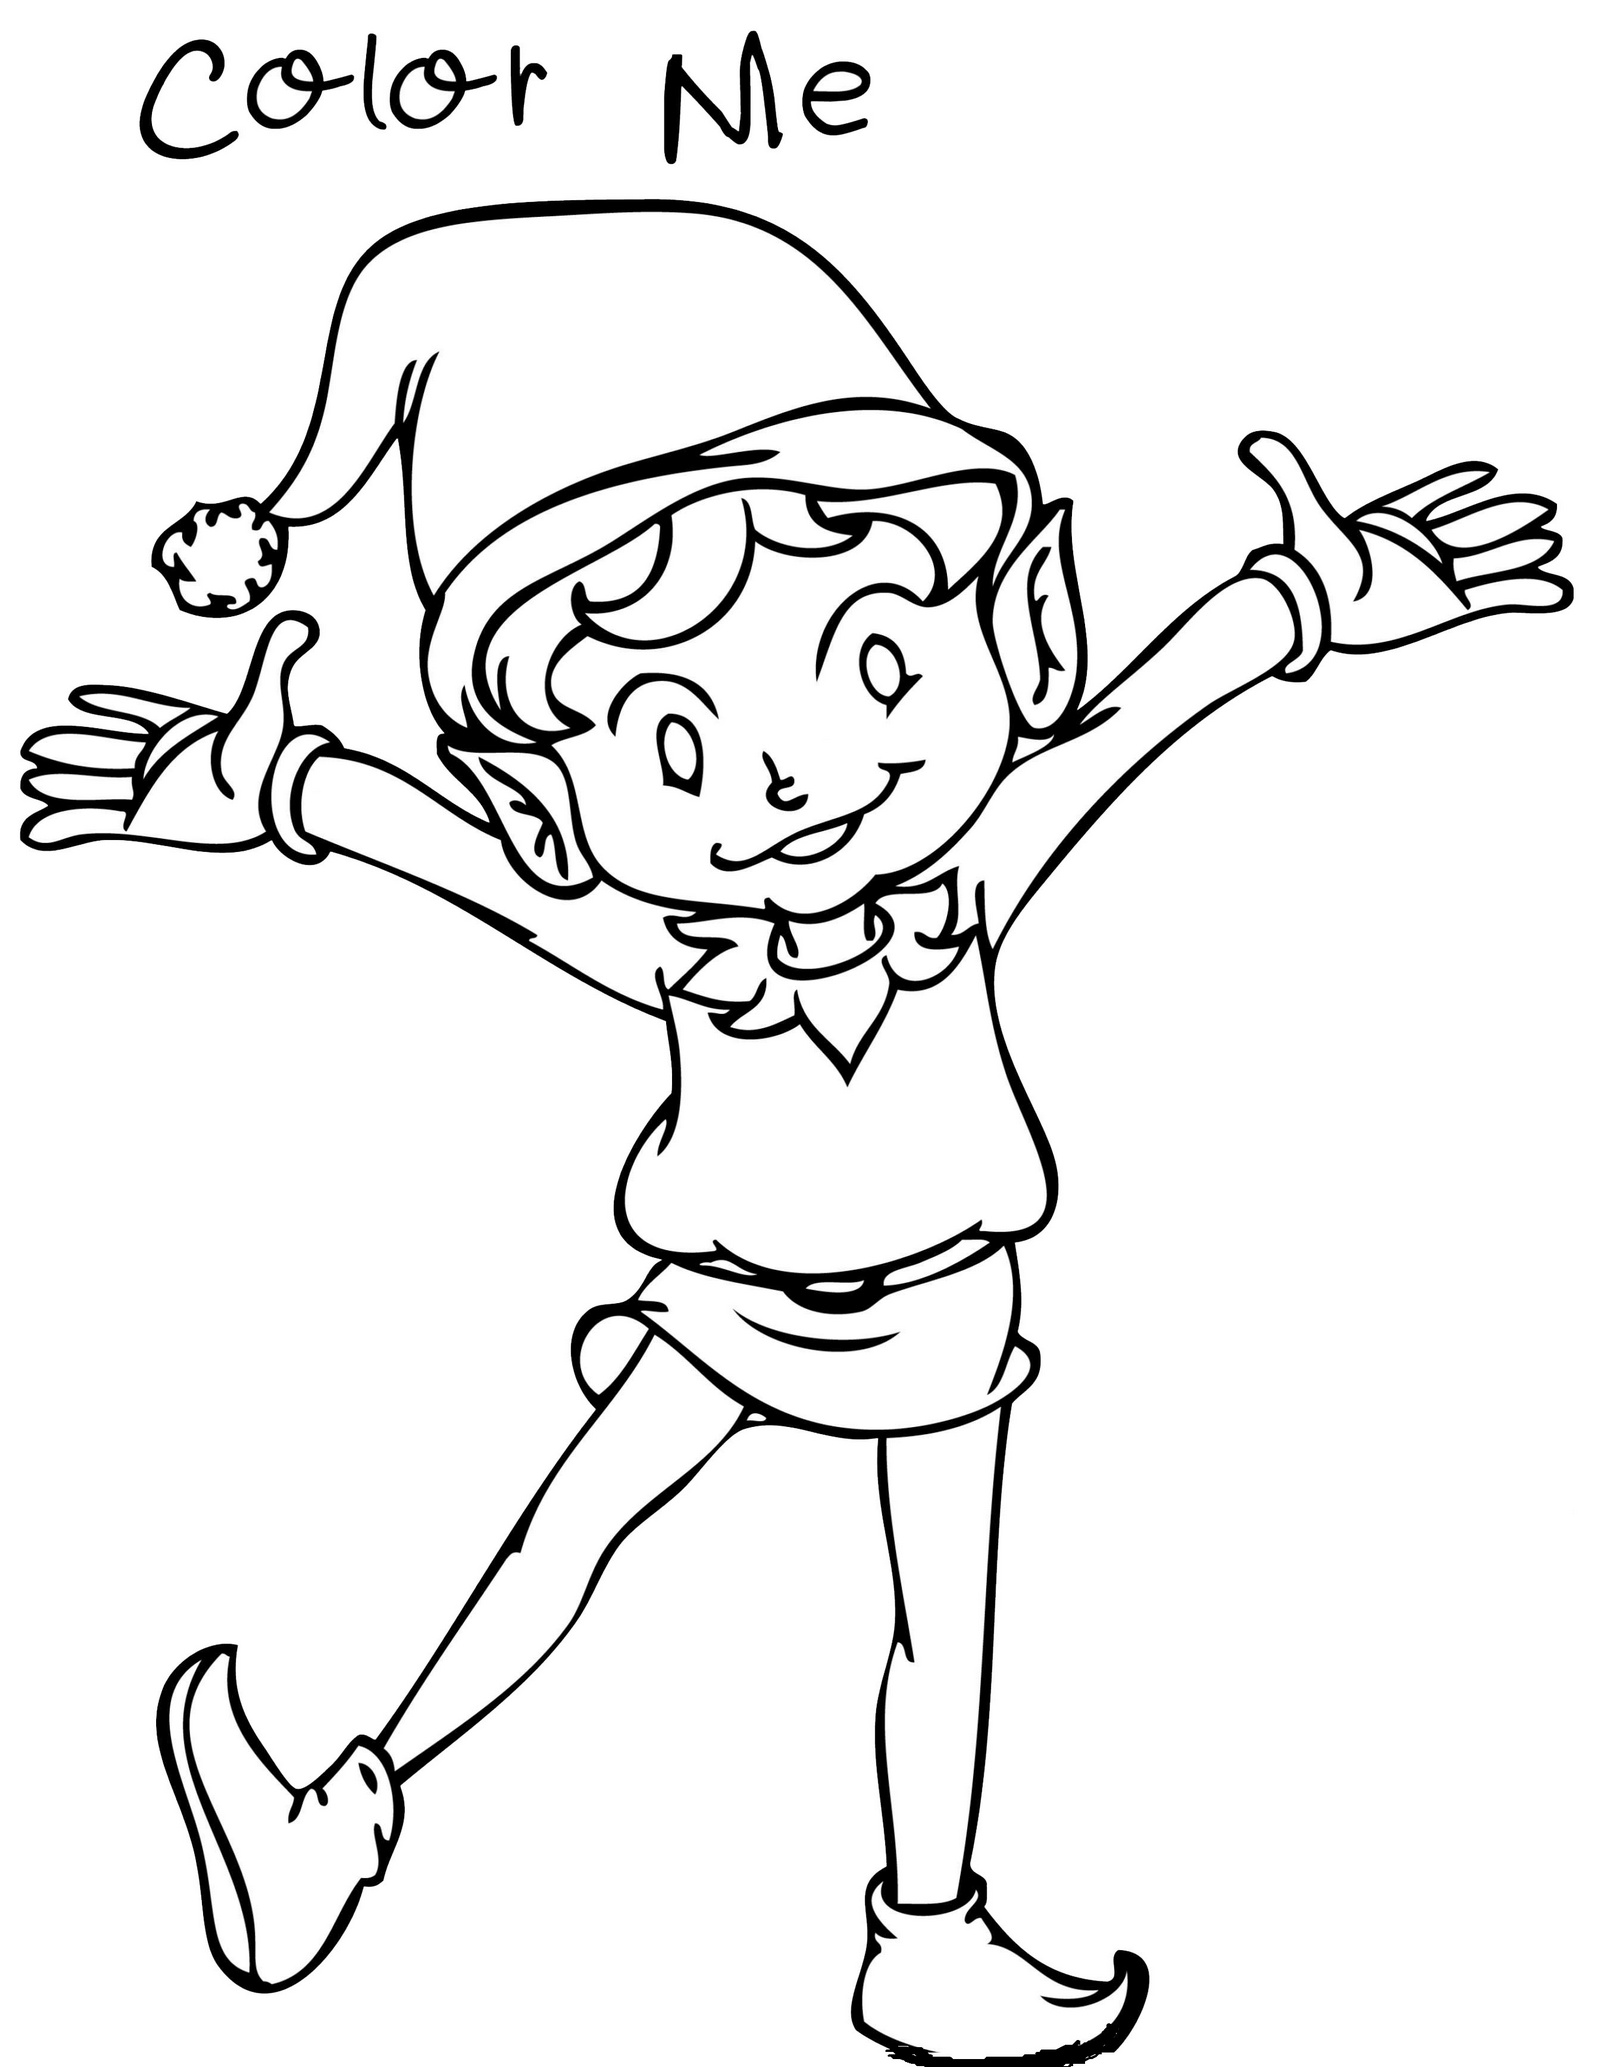 Elf on the Shelf Coloring Pages for Your Little Angles - Coloring Pages